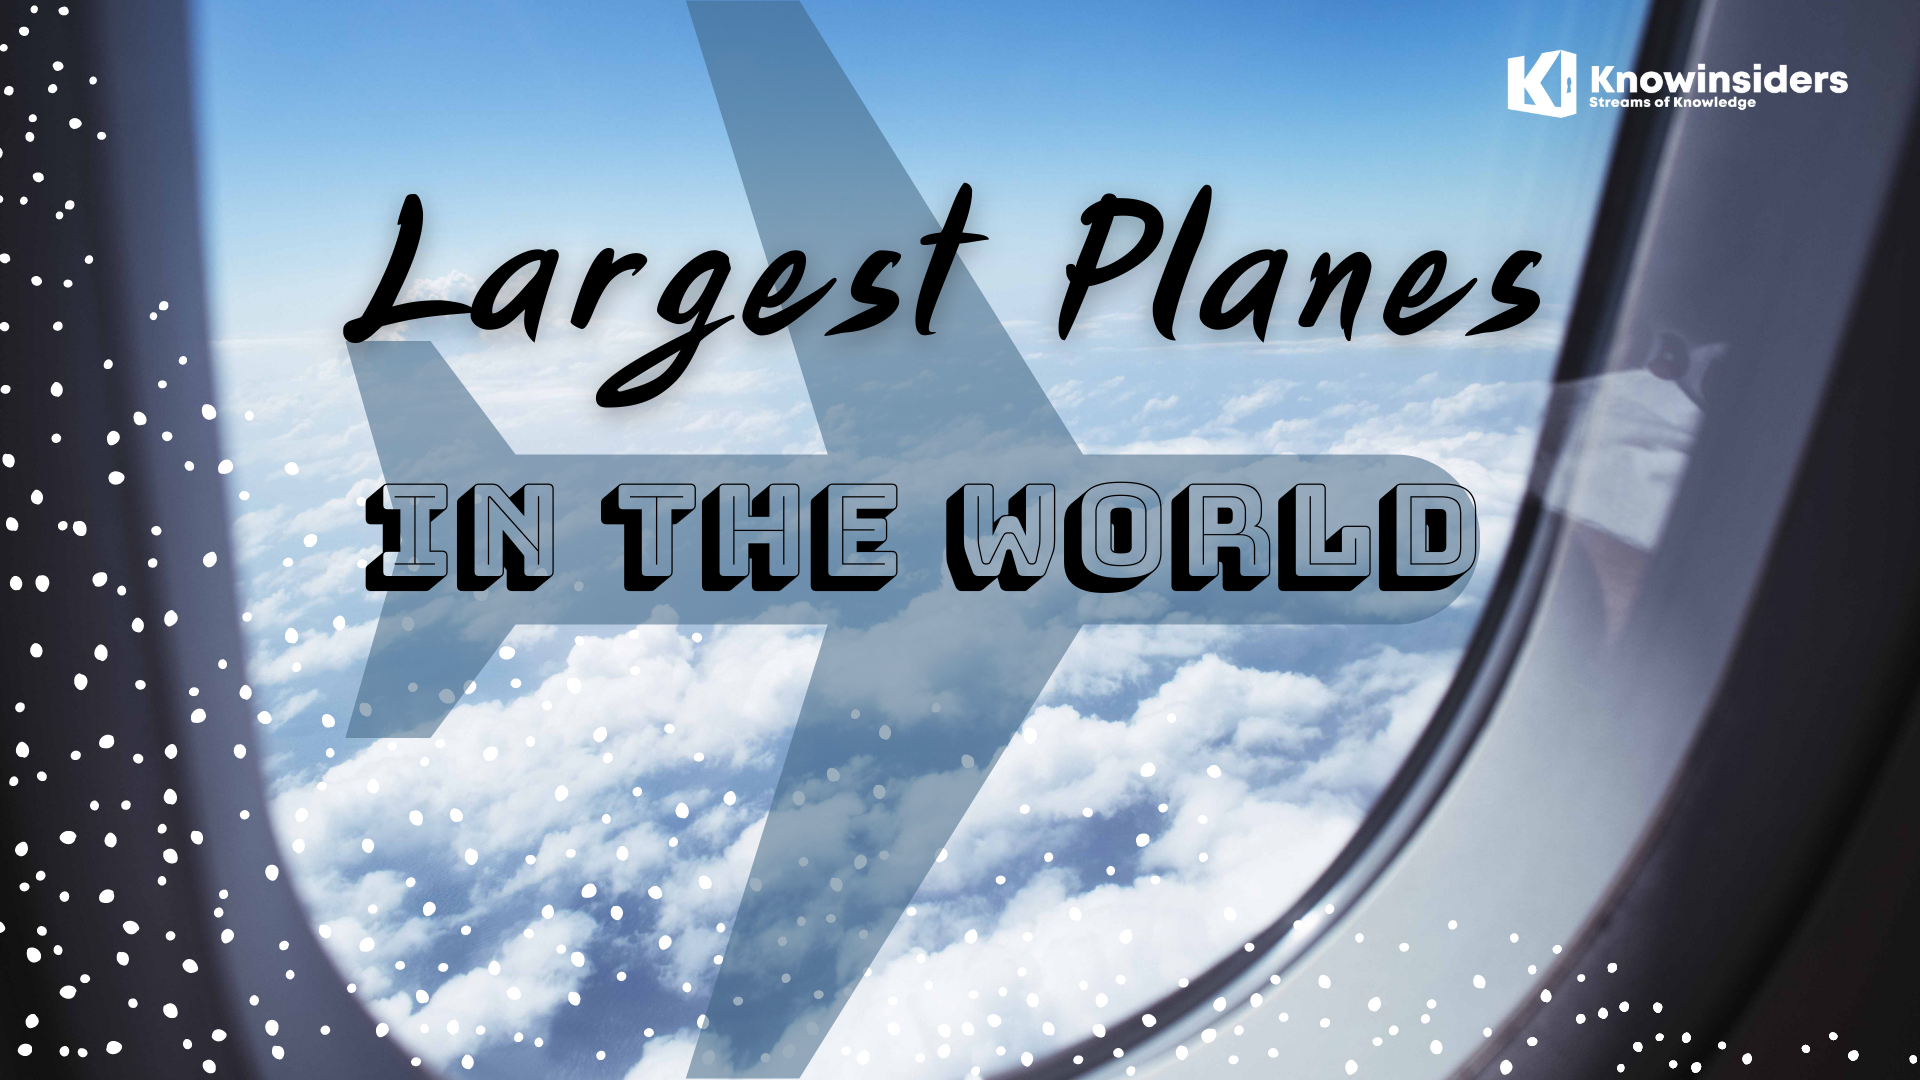 Largest Planes In The World. Photo: Knowinsiders.